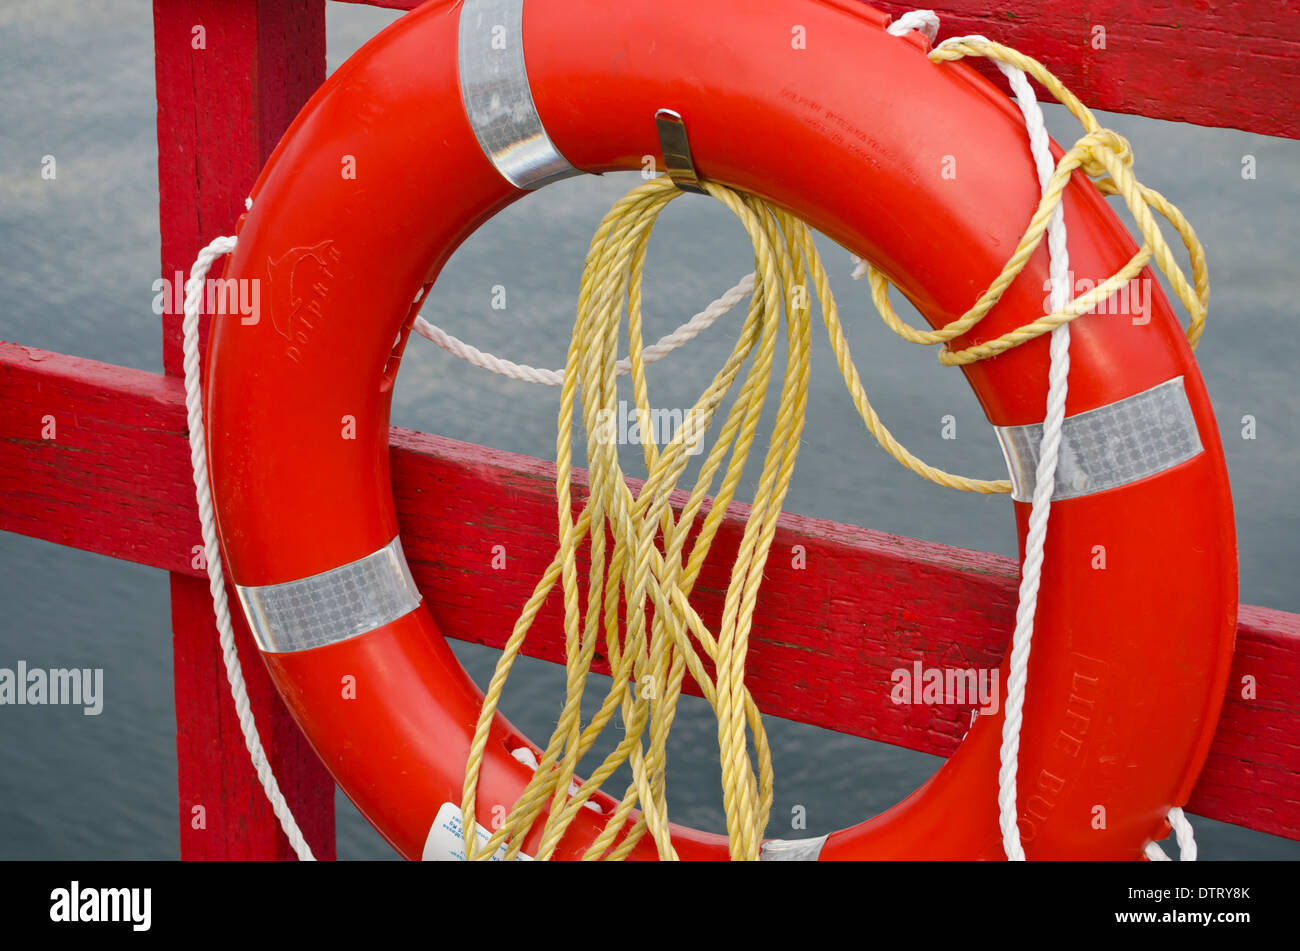 Red round life preserver and yellow ropes tied against a red post by the water. Stock Photo